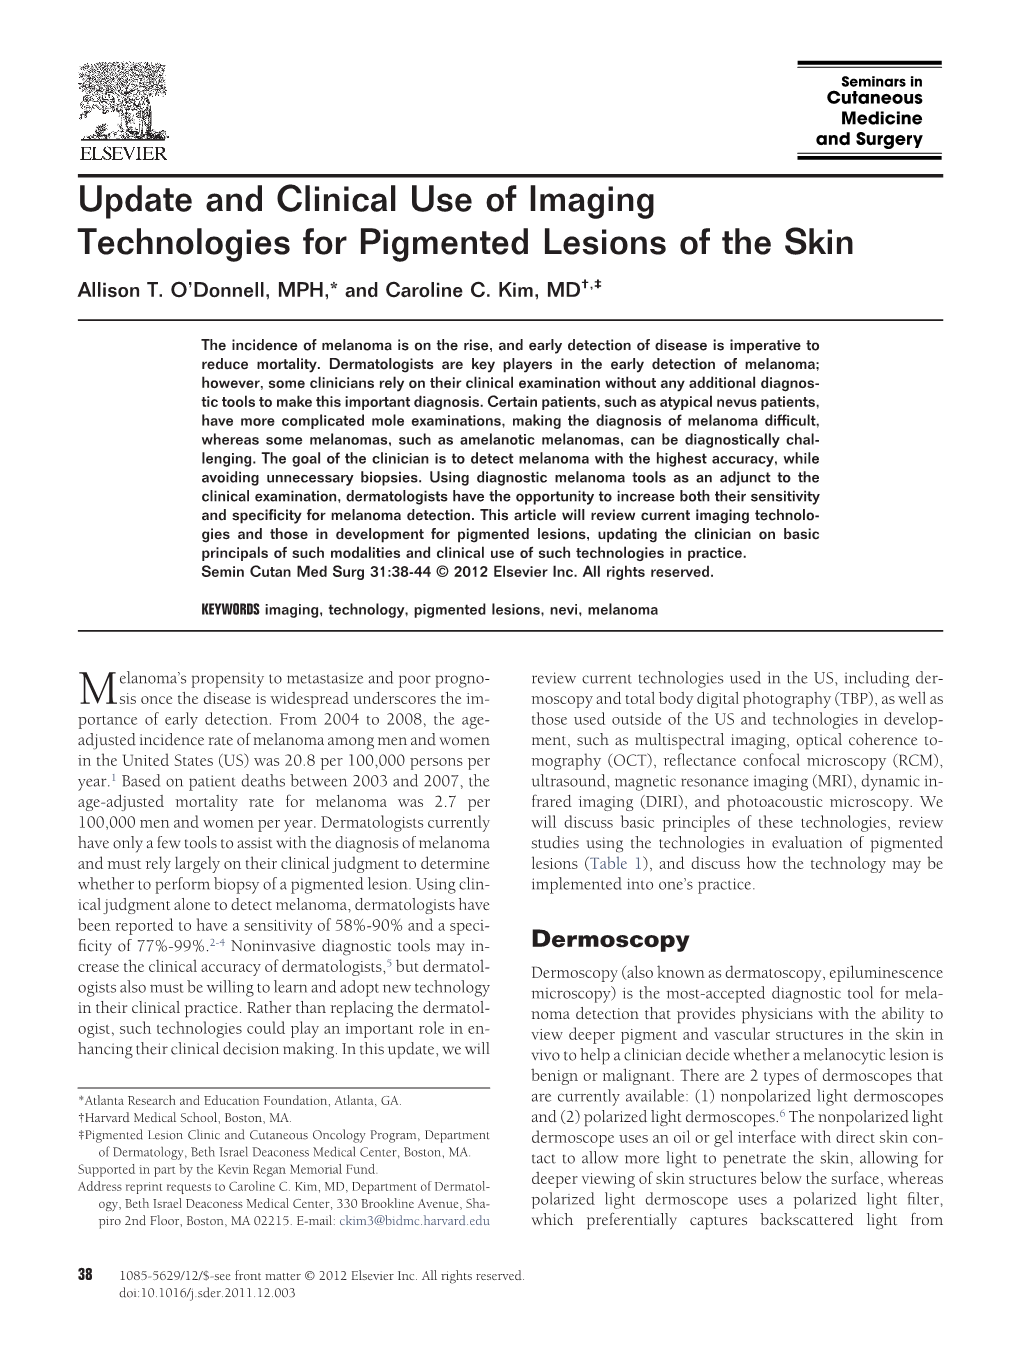 Update and Clinical Use of Imaging Technologies for Pigmented Lesions of the Skin Allison T